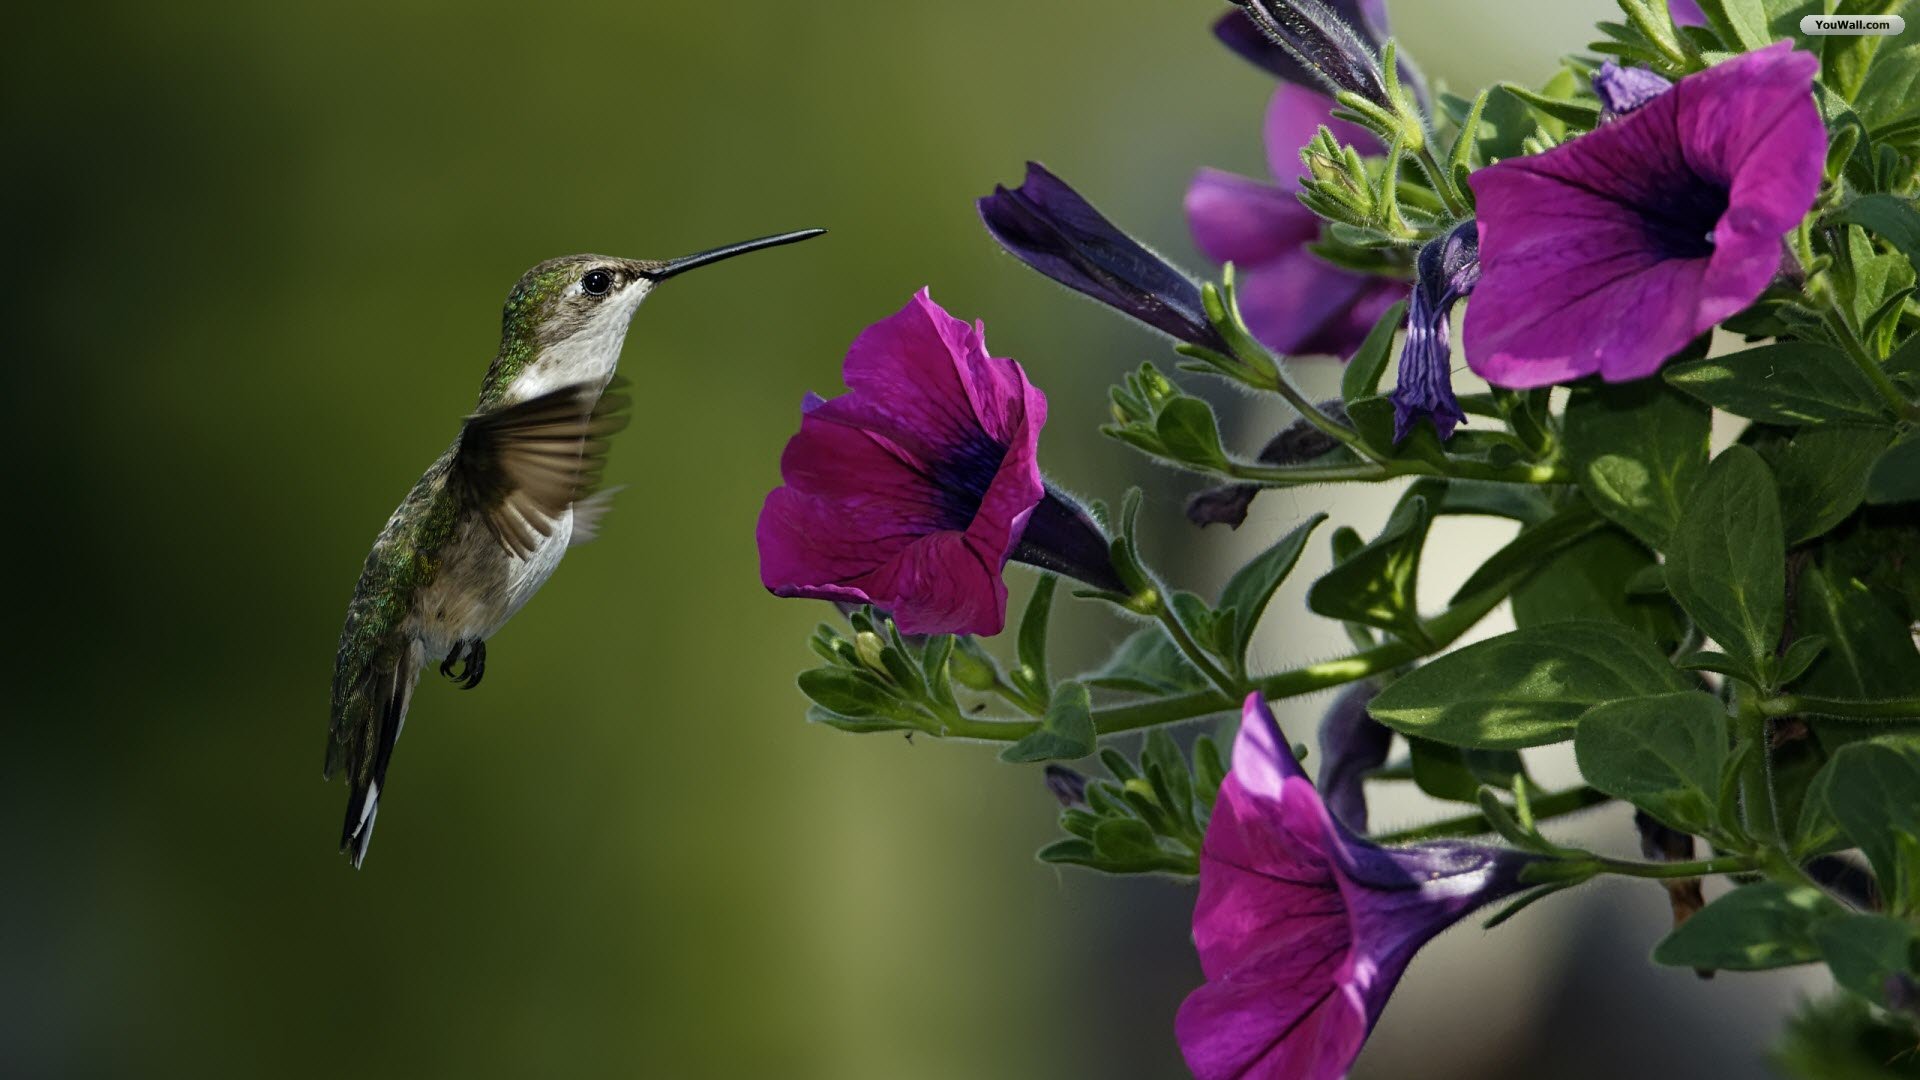  Free Images Birds Flowers Wallpaper 1920x1080 Full HD Wallpapers